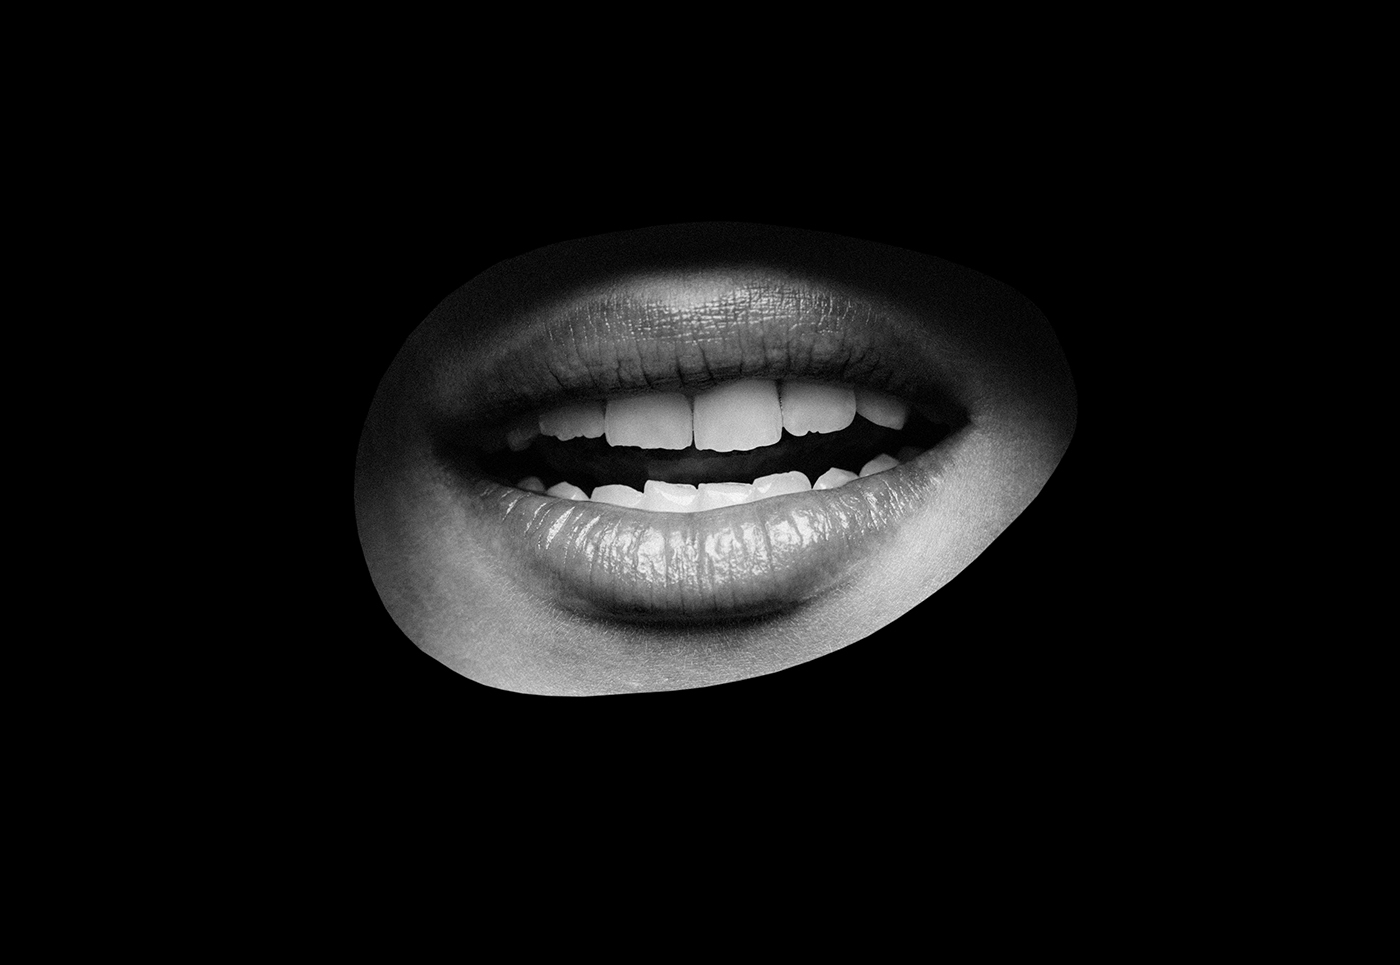 A black and white abstract image of a mouth